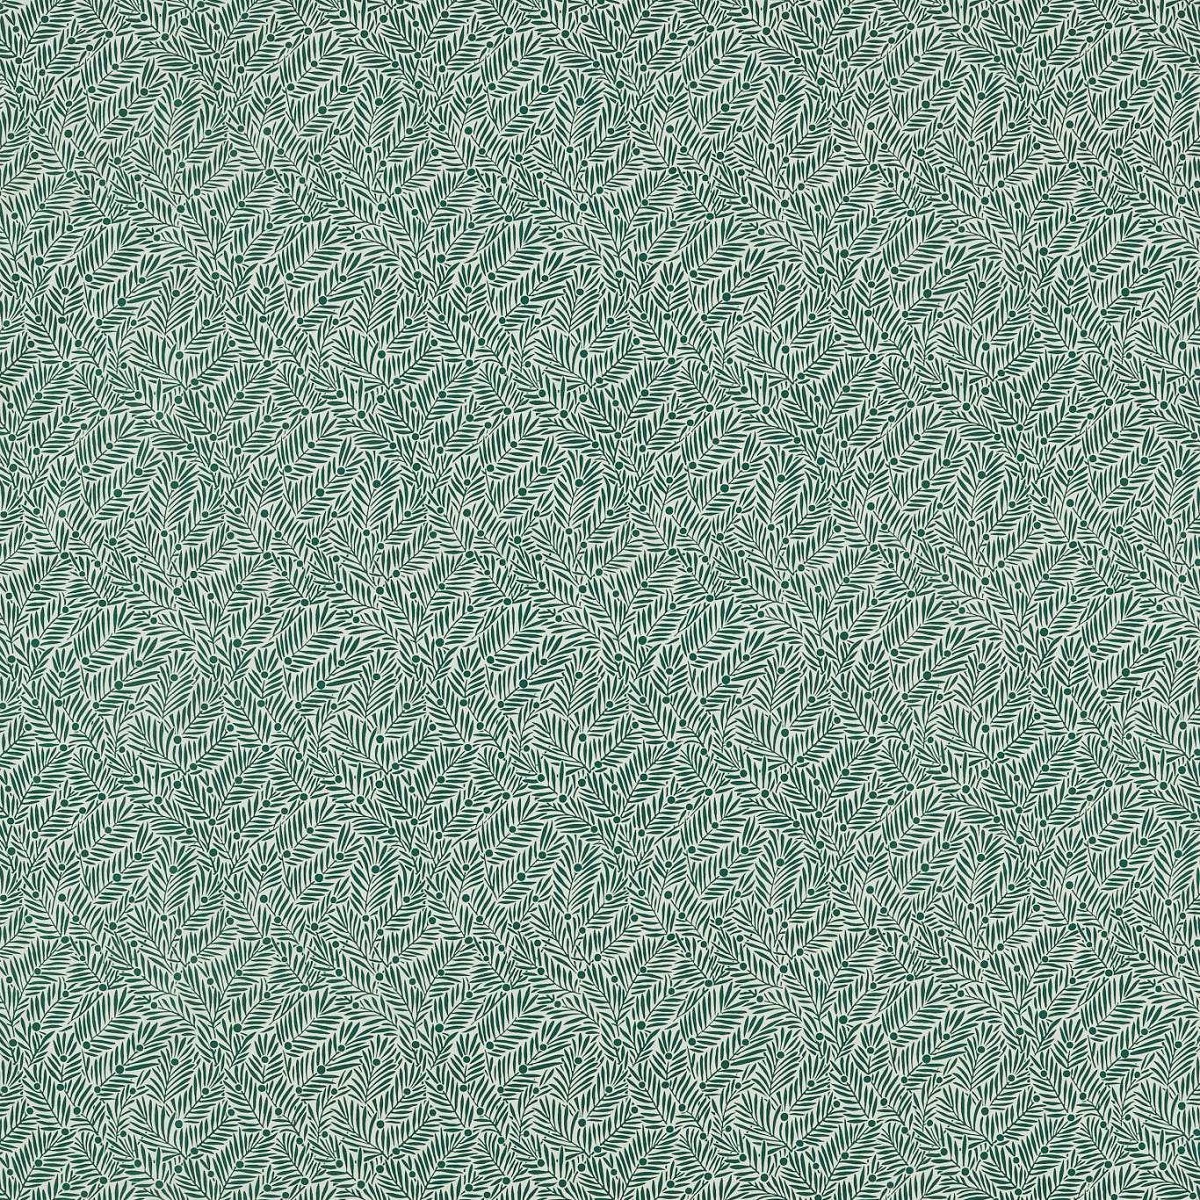 Yew & Aril Seagreen Fabric by William Morris & Co.